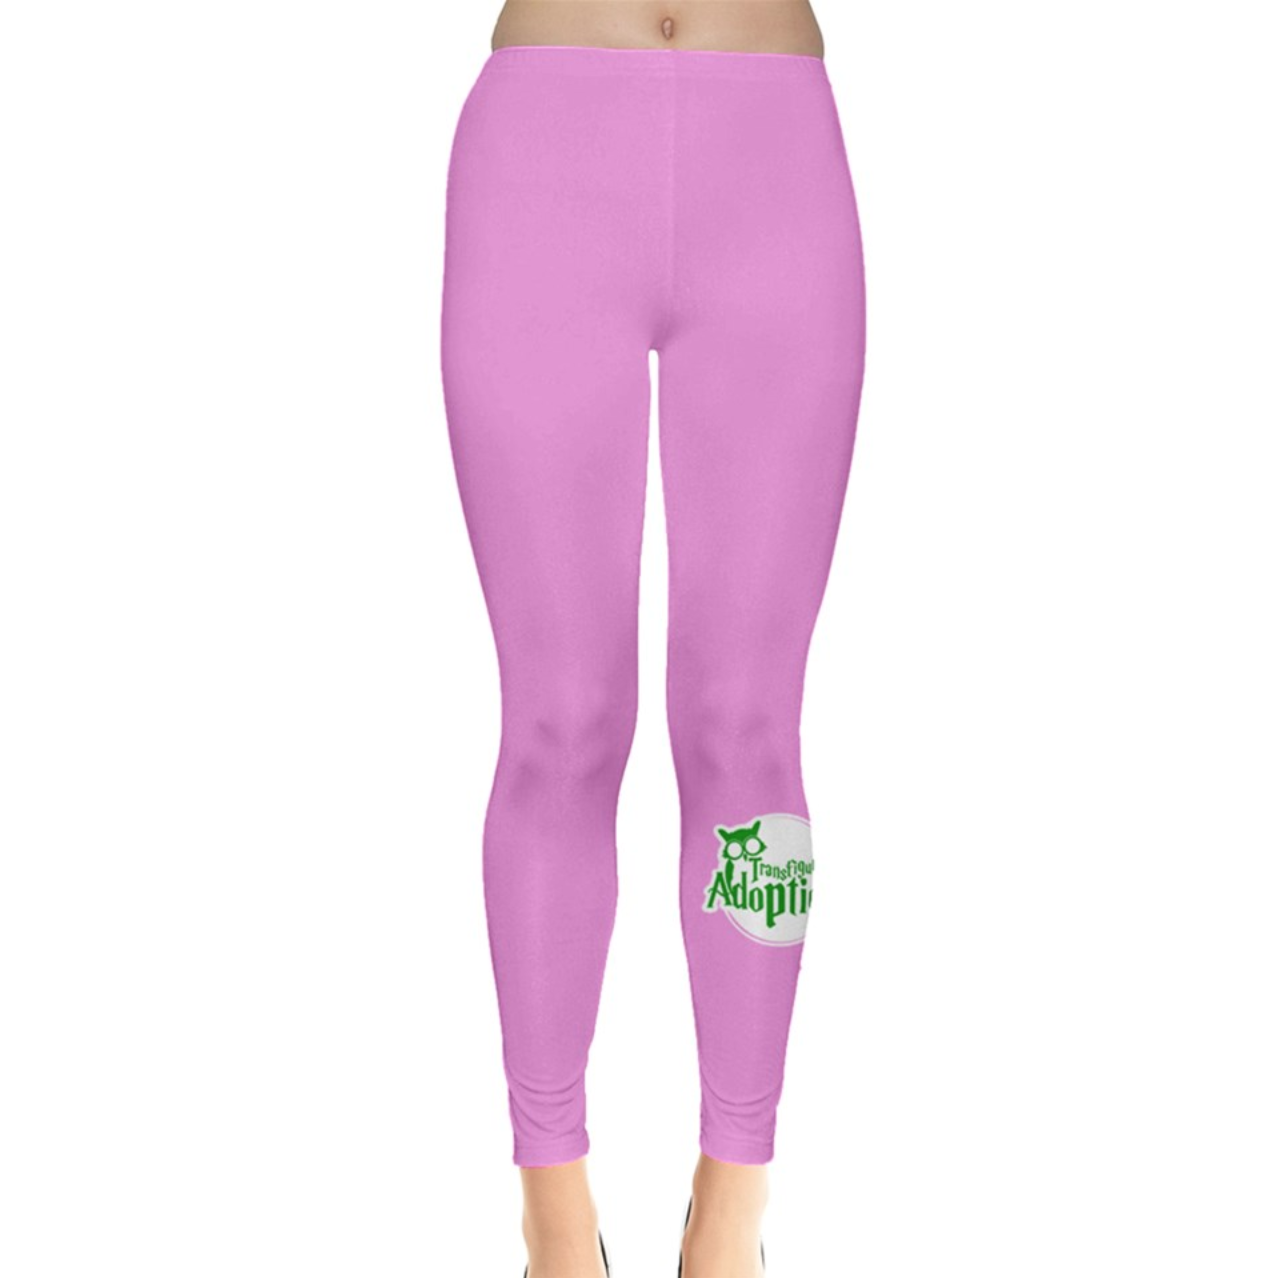 Candy Store Leggings (Pink)